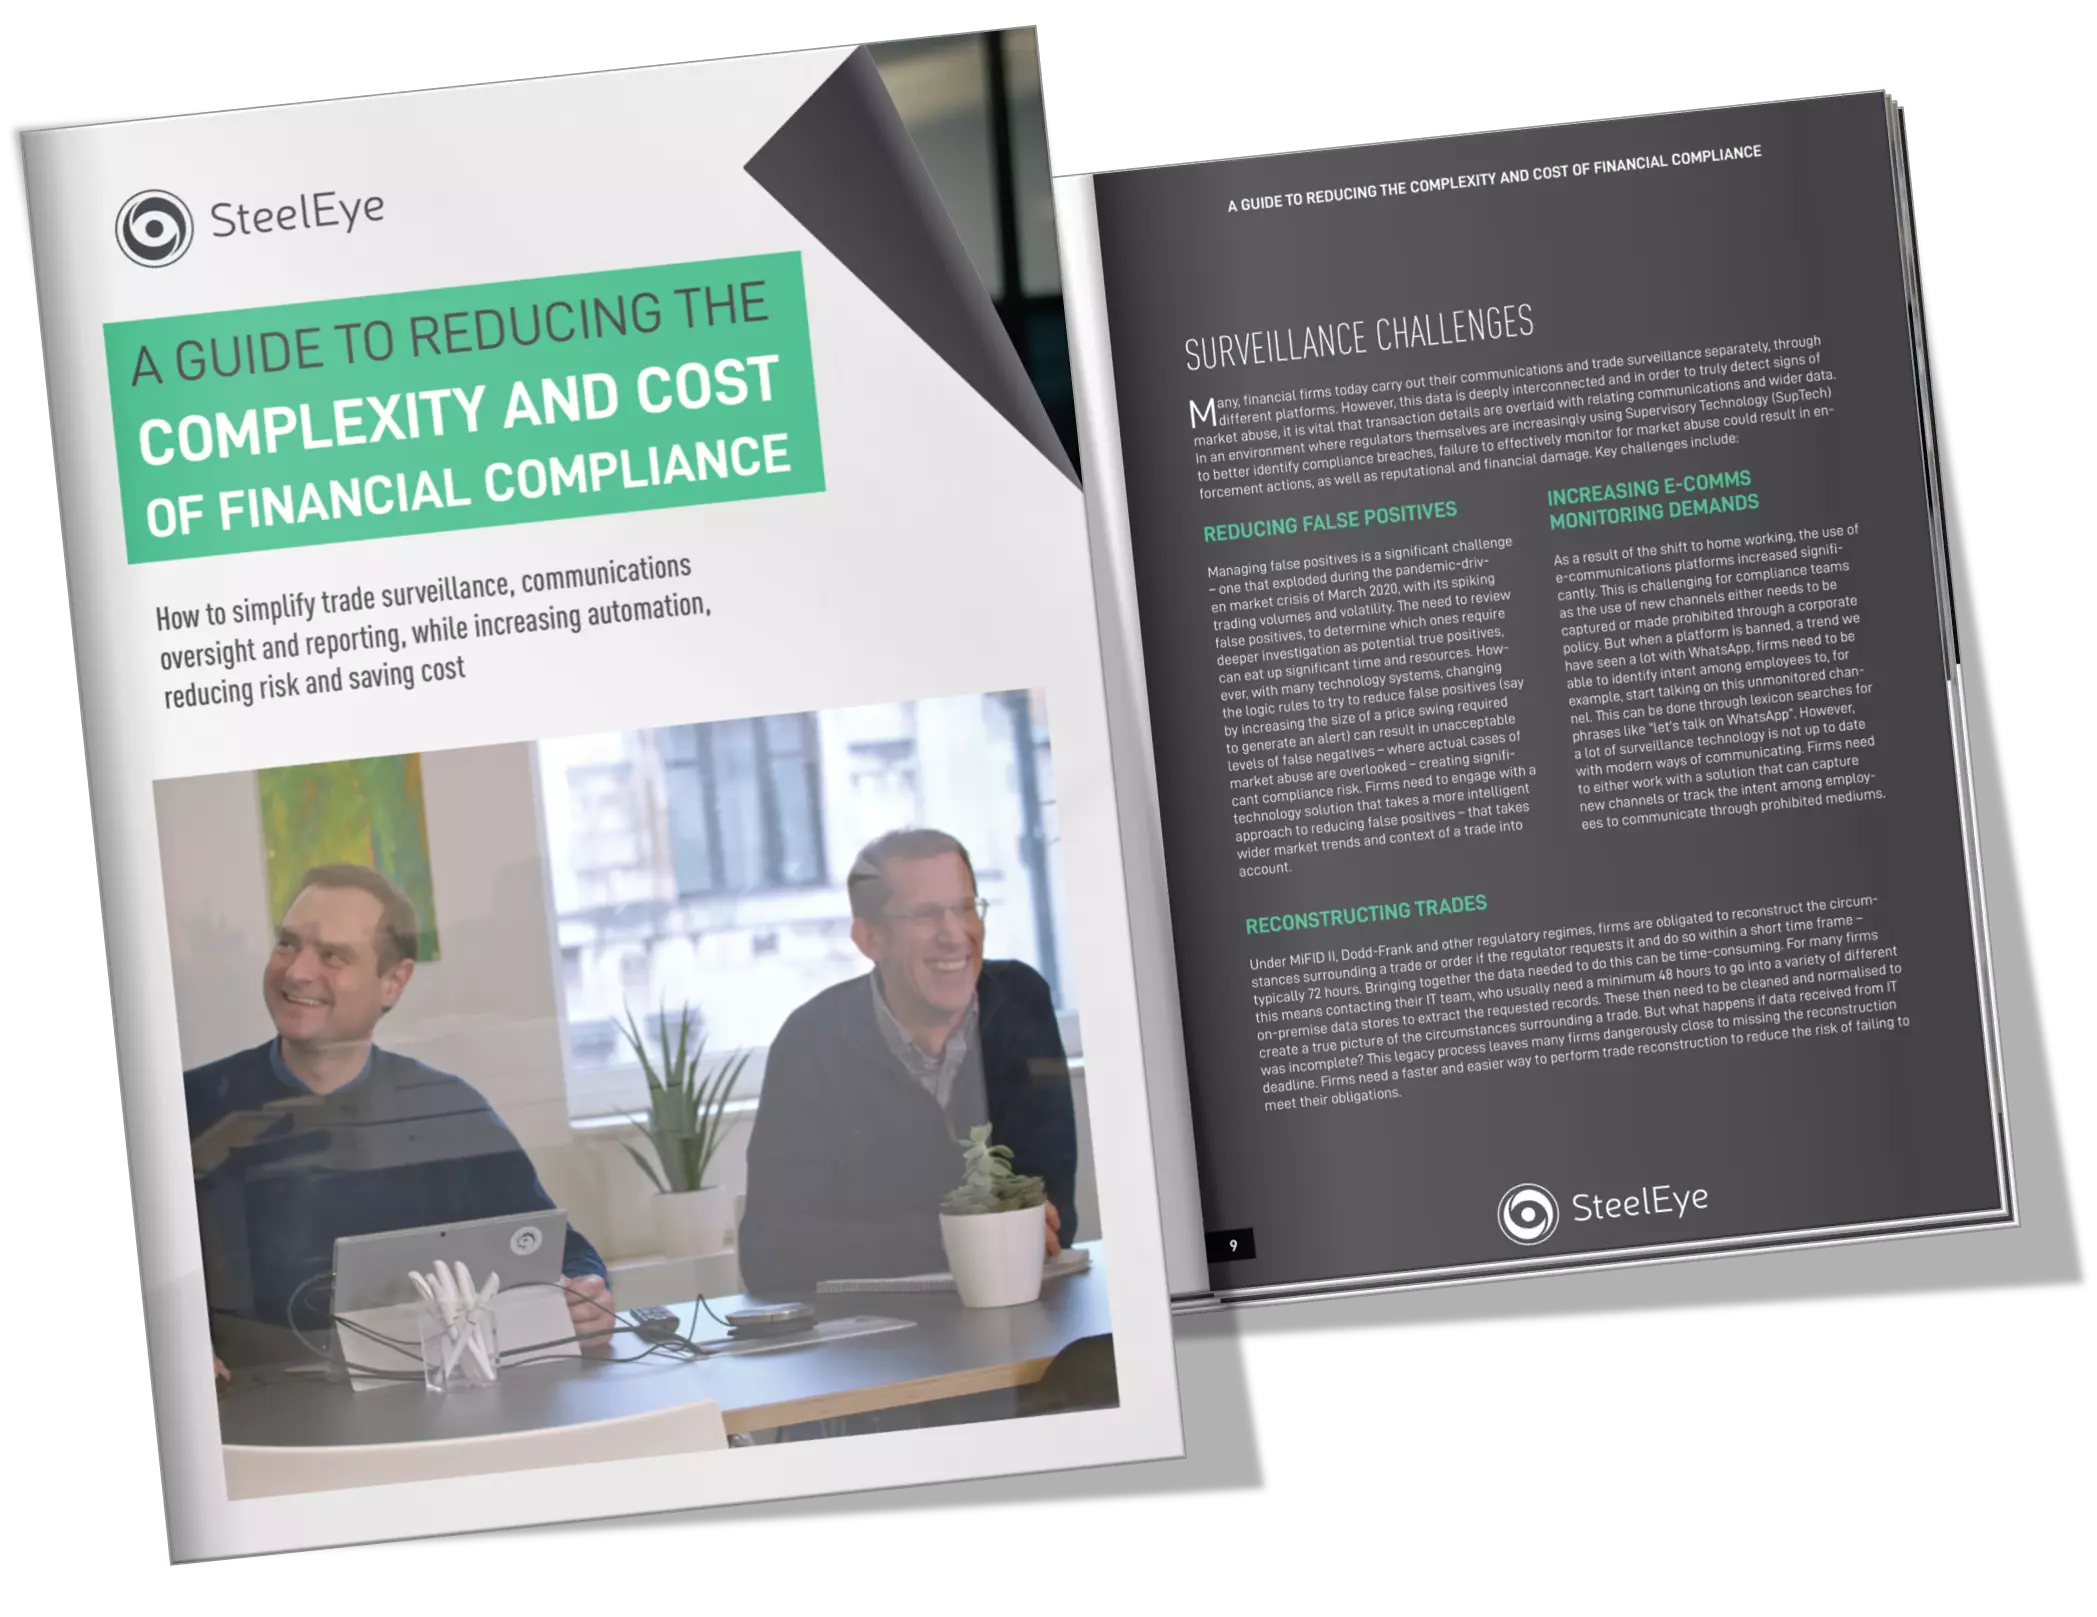 A-guide-to-reducing-complexity-and-cost-of-financial-compliance